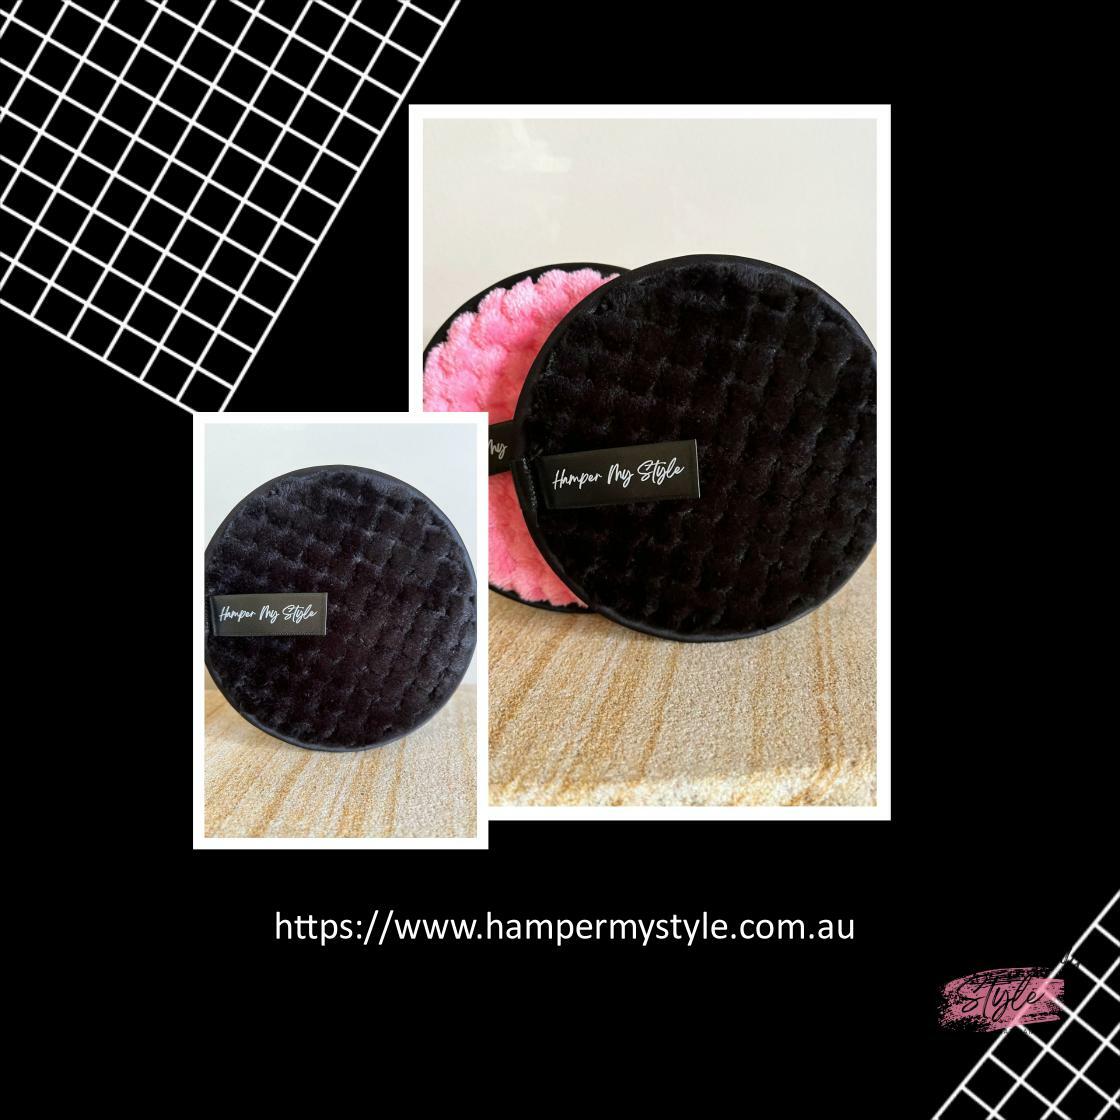 #melbournebusiness #sydneybusiness Microfibre Large Makeup Cleansing Pads by Hamper My Style
$6.00
Get here hampermystyle.com.au/products/micro…